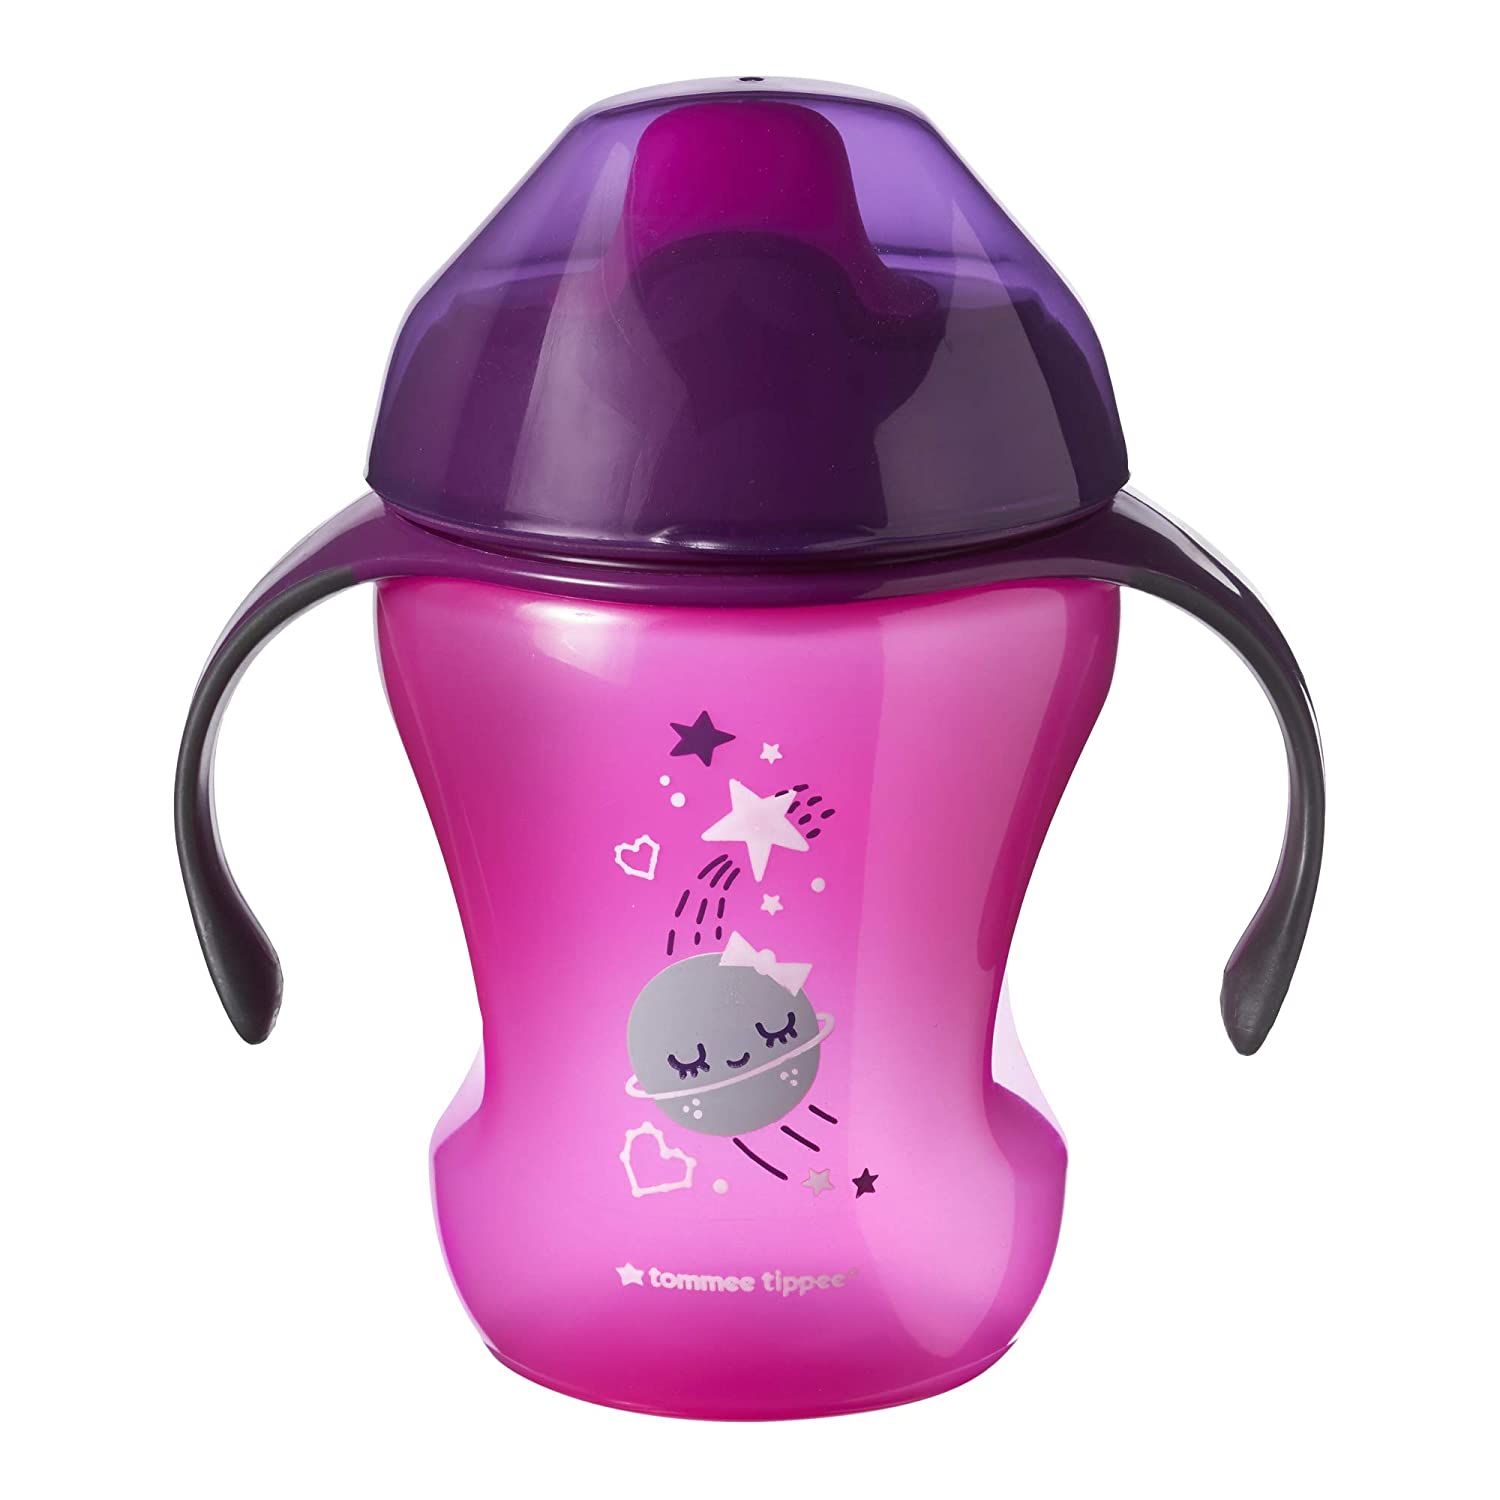 Tommee Tippee Explora Easy Drink Sippy Cup 6+ Months - Purple (Colour and Design May Vary) BPA Free